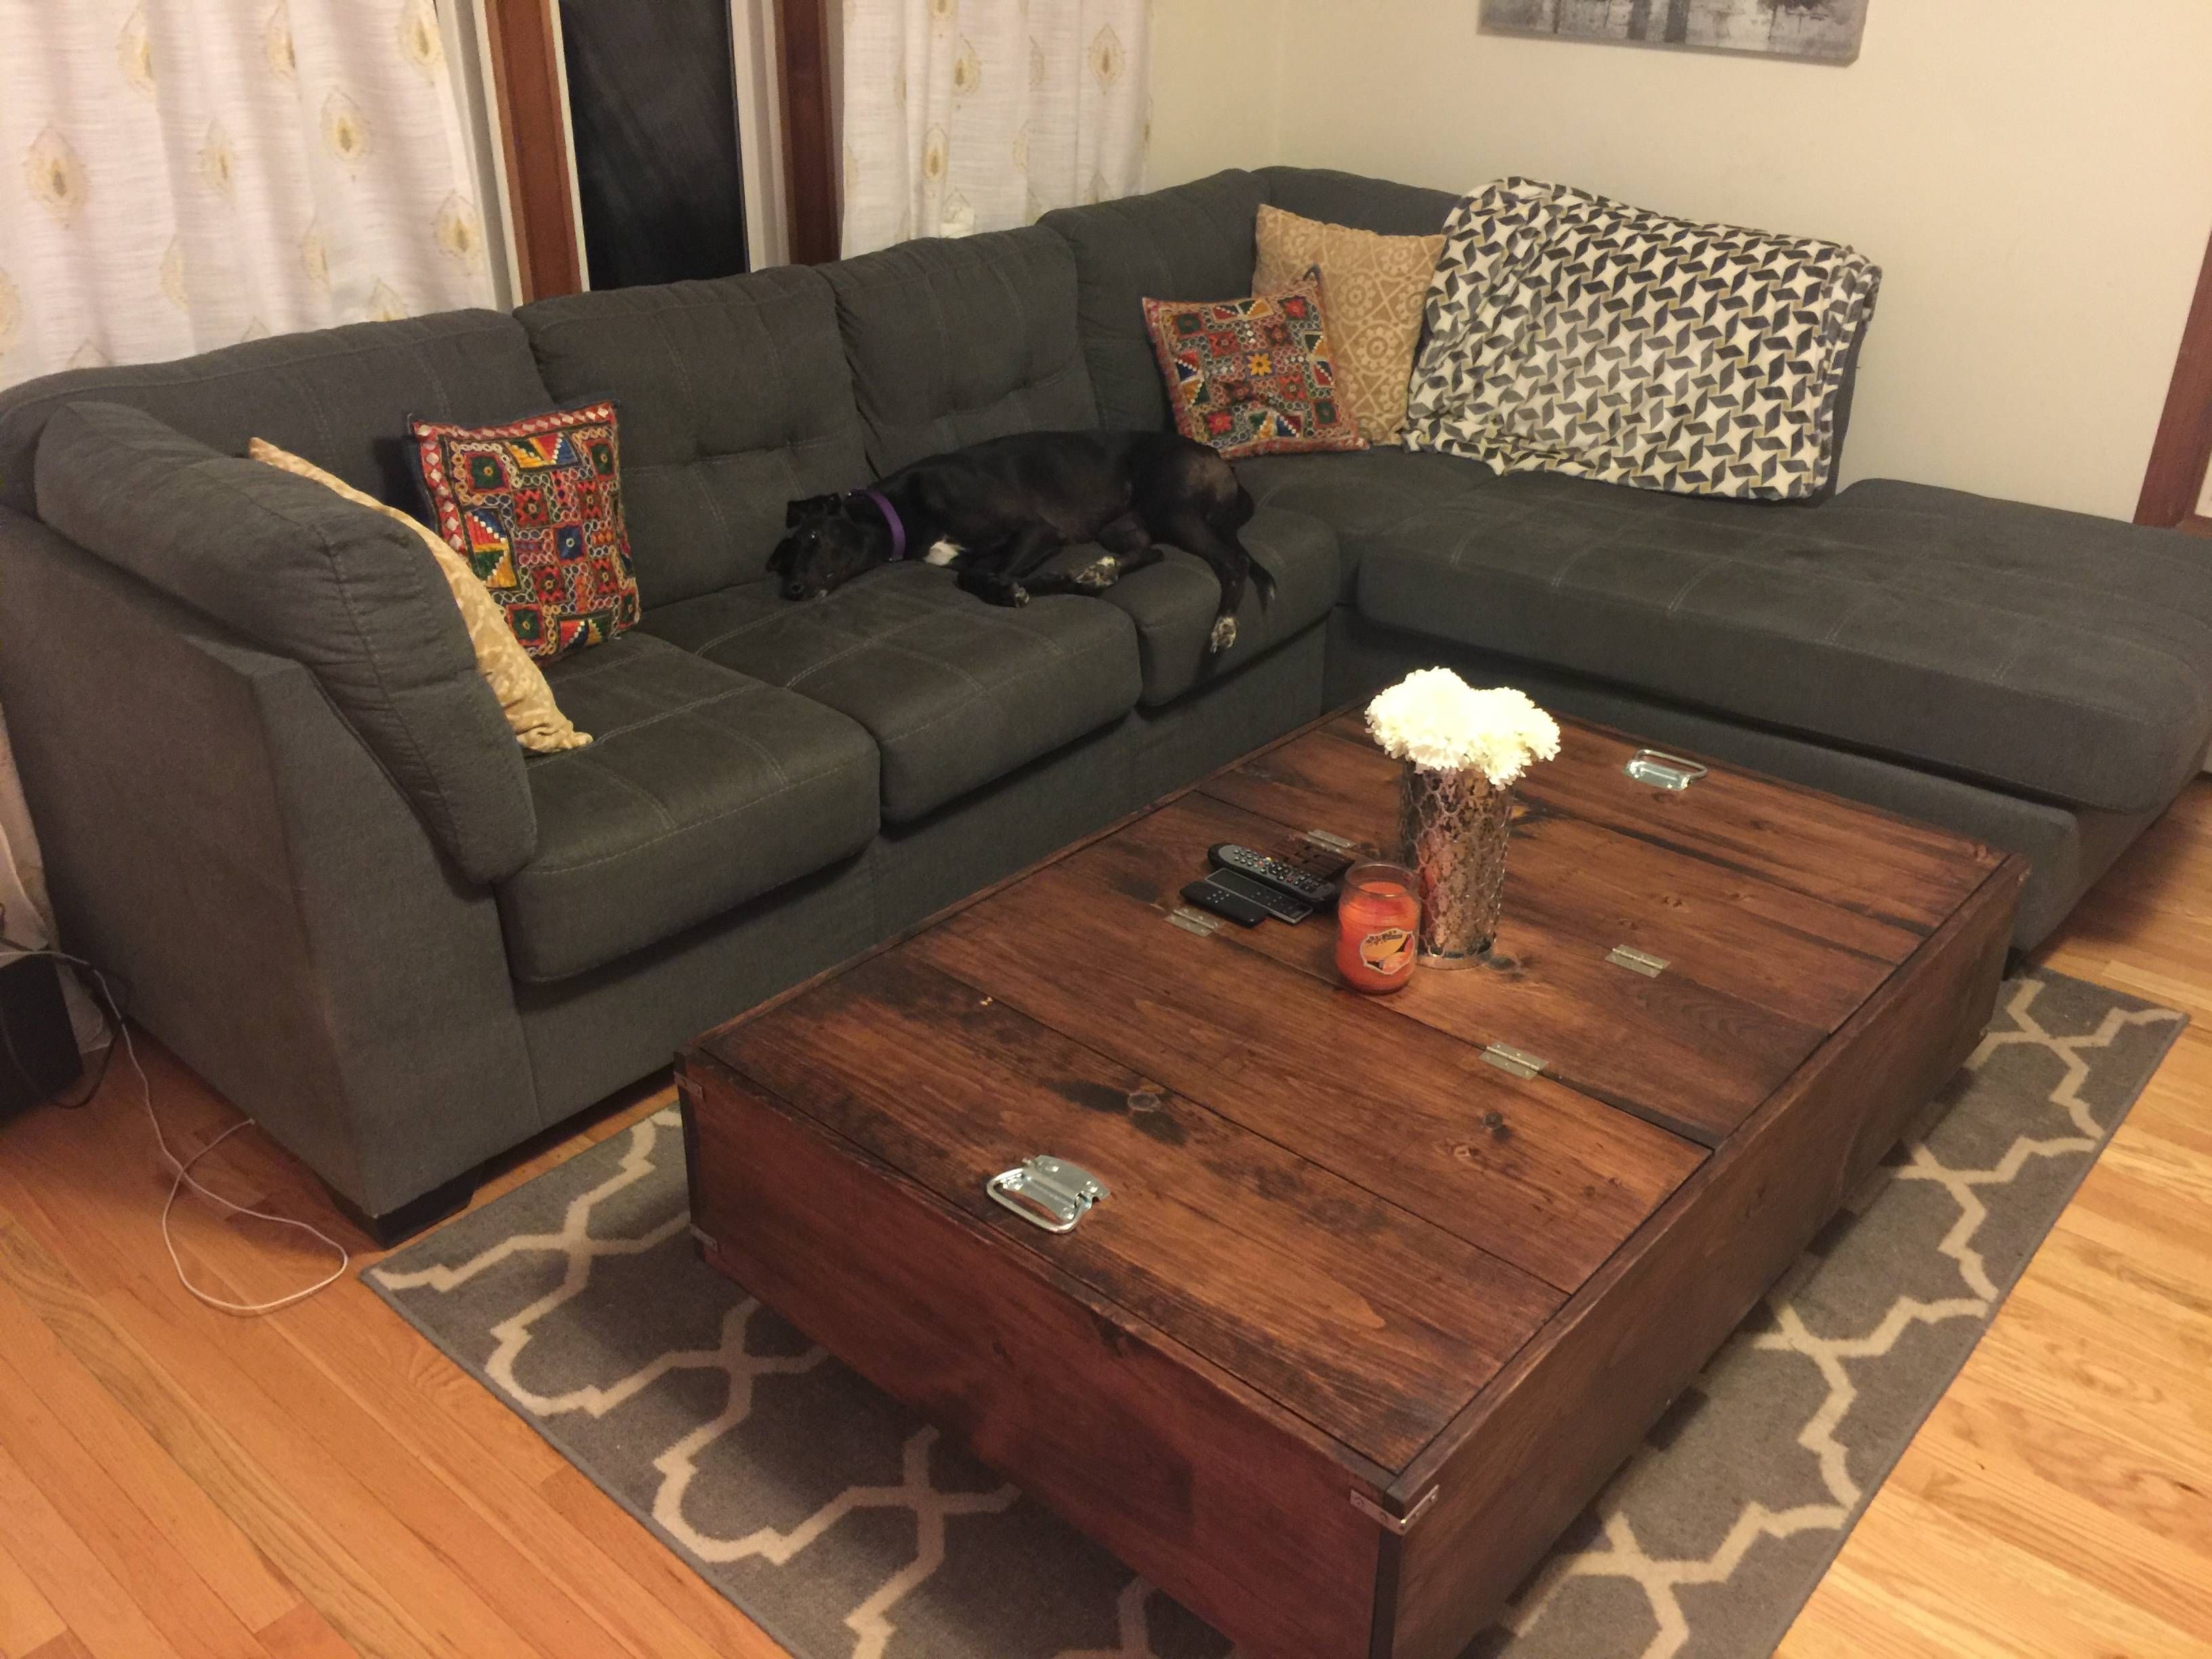 Diy Large Coffee Table With Storage – Album On Imgur In Large Coffee Table With Storage (View 5 of 12)